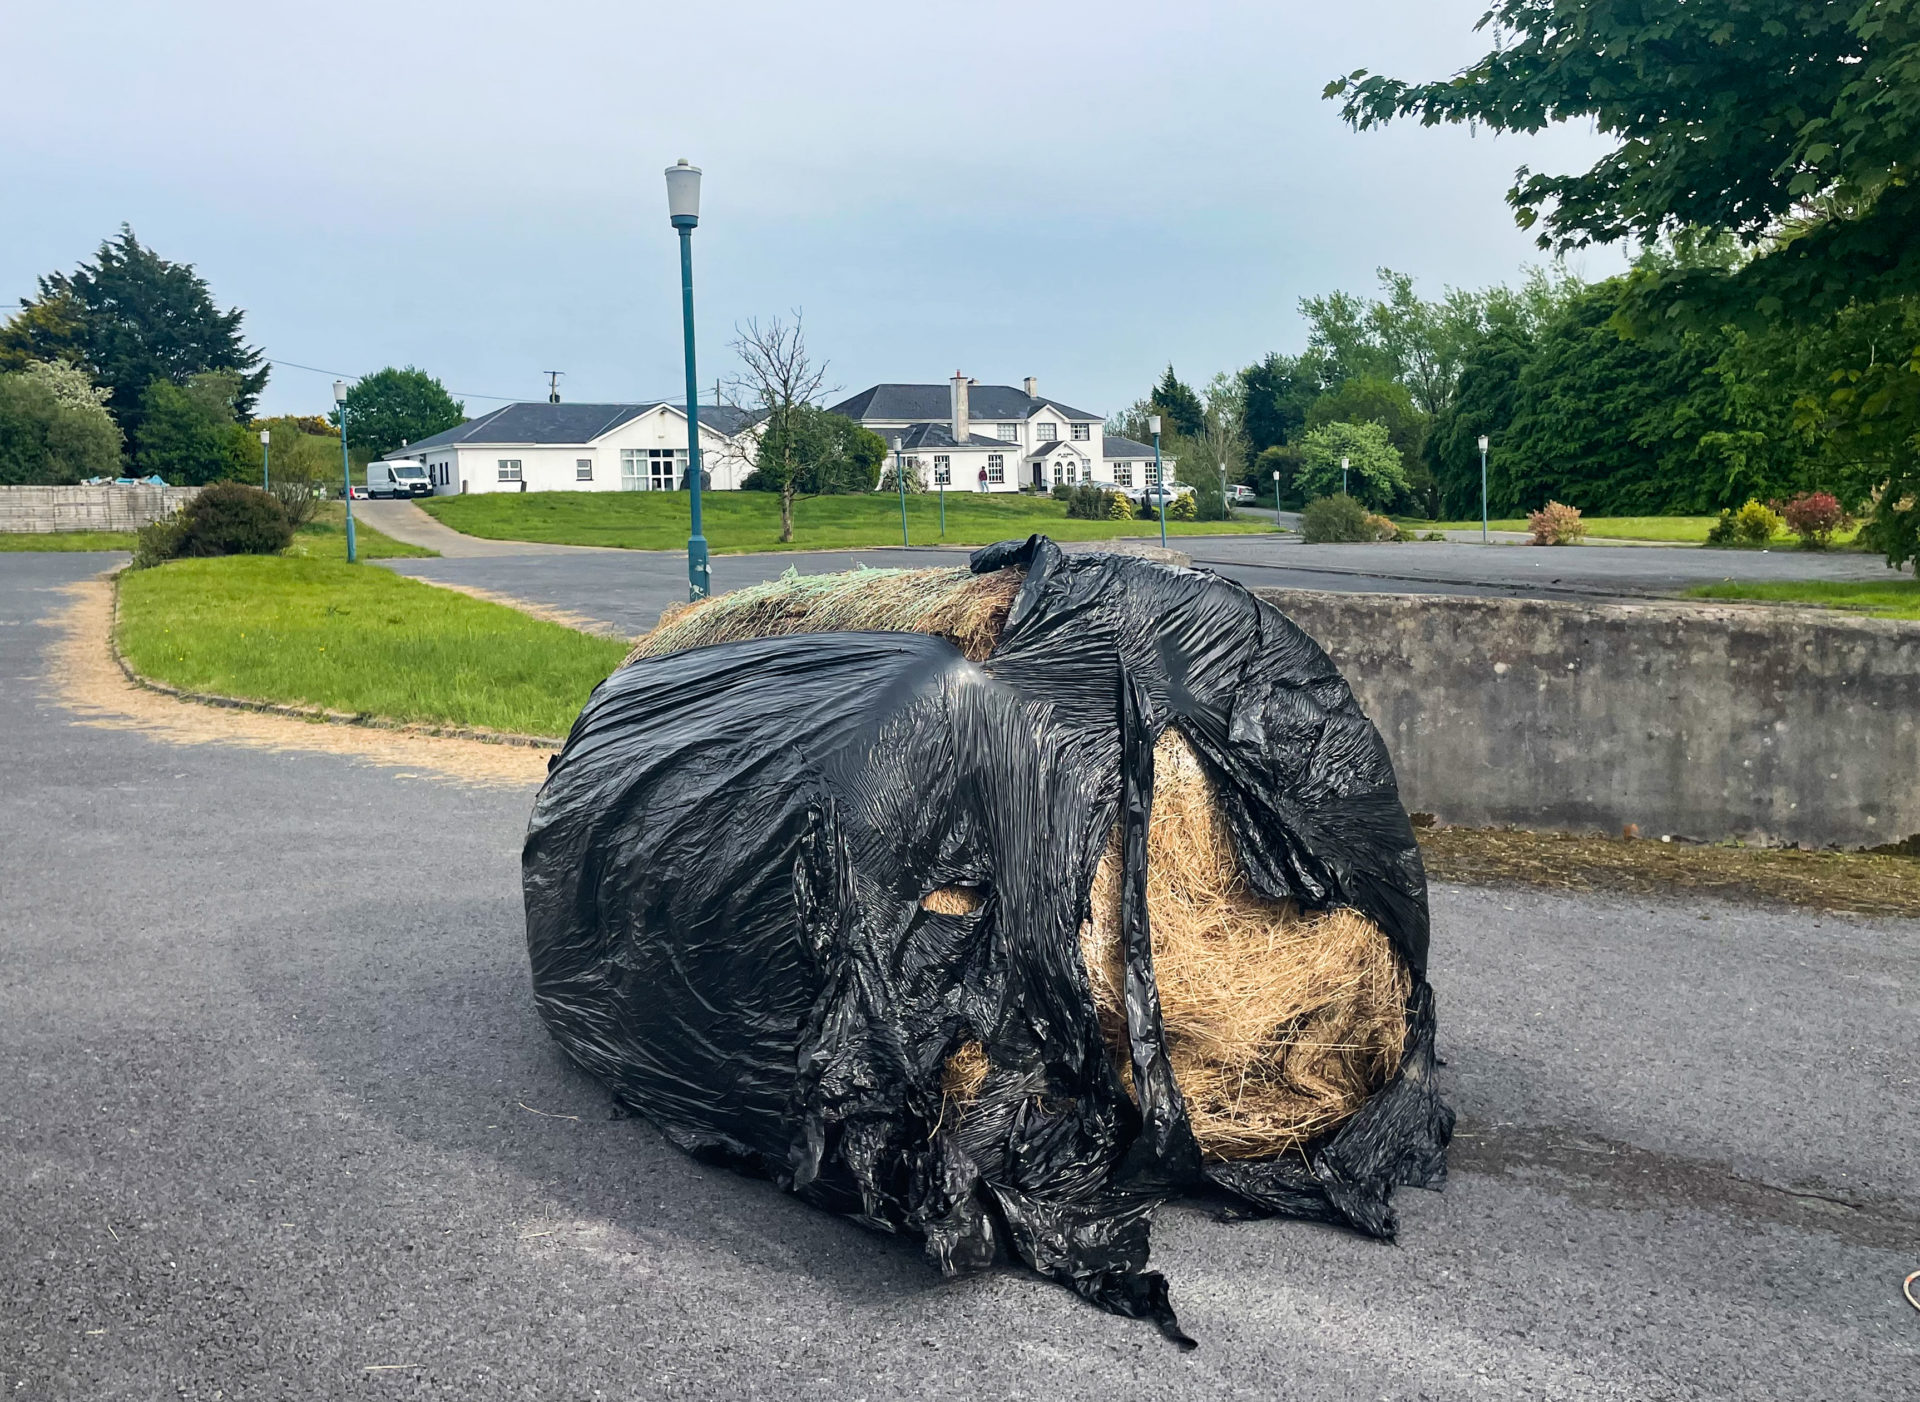 Pictured is a bale of hay blocking the entrance to the Magowna House Hotel and guest homes in Co. Clare. Locals have protested after refugees were housed here. 